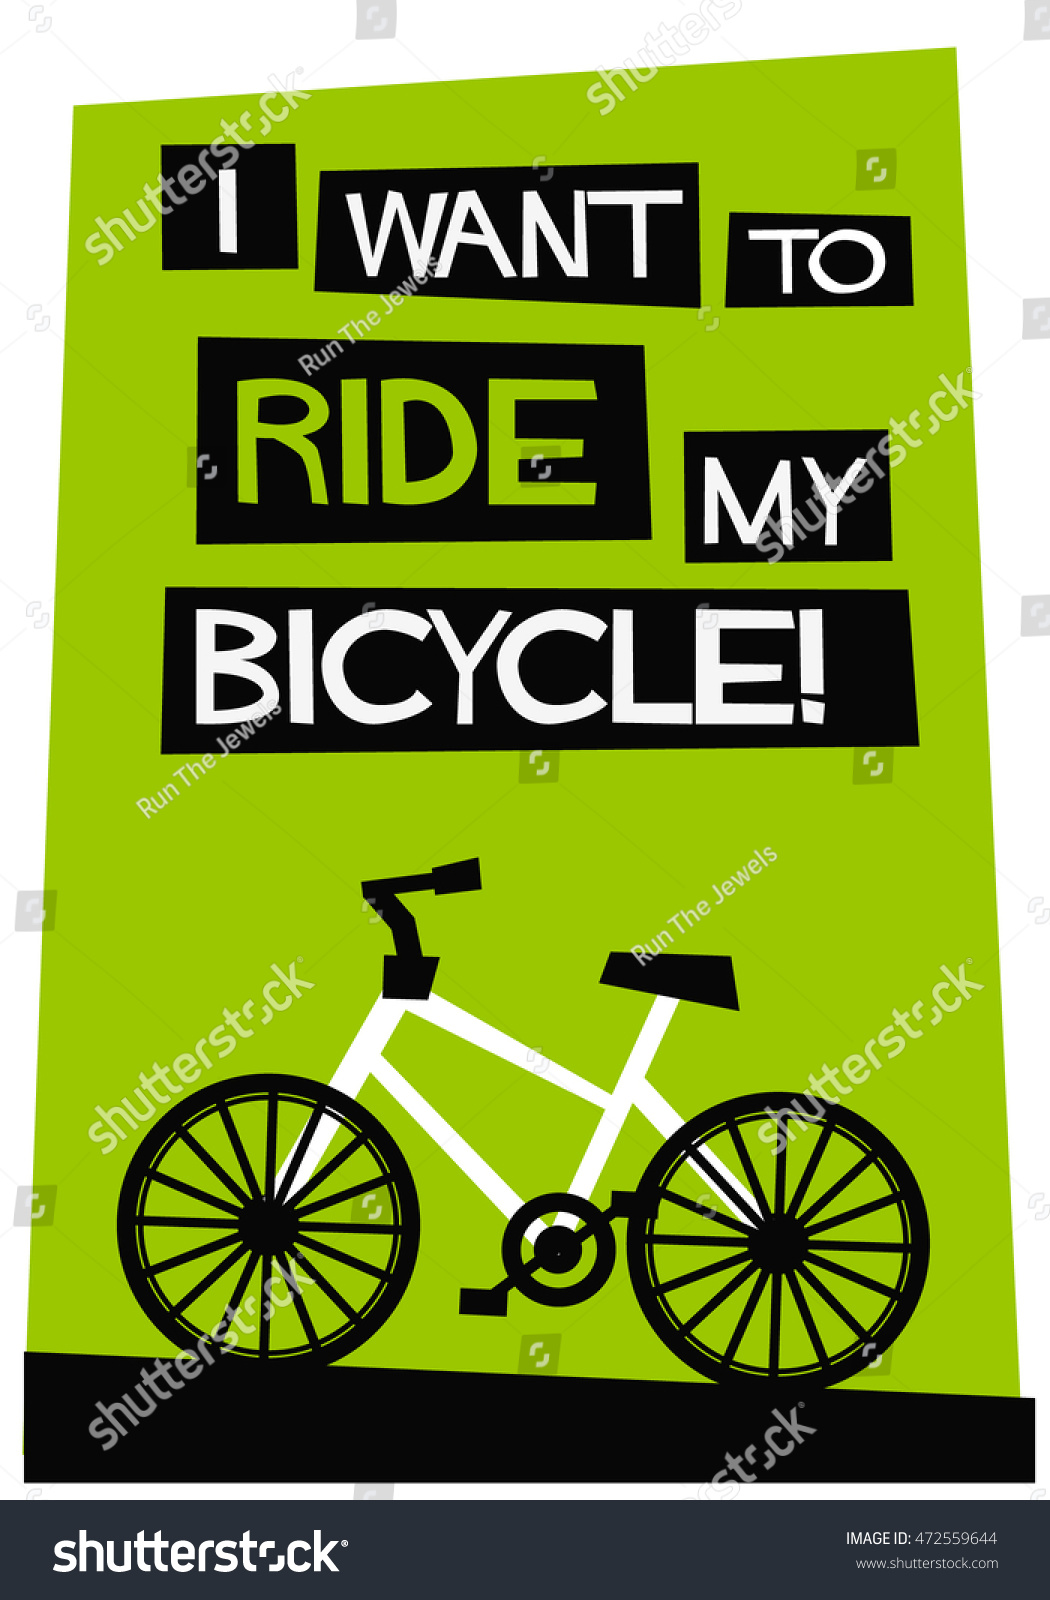 i want cycle